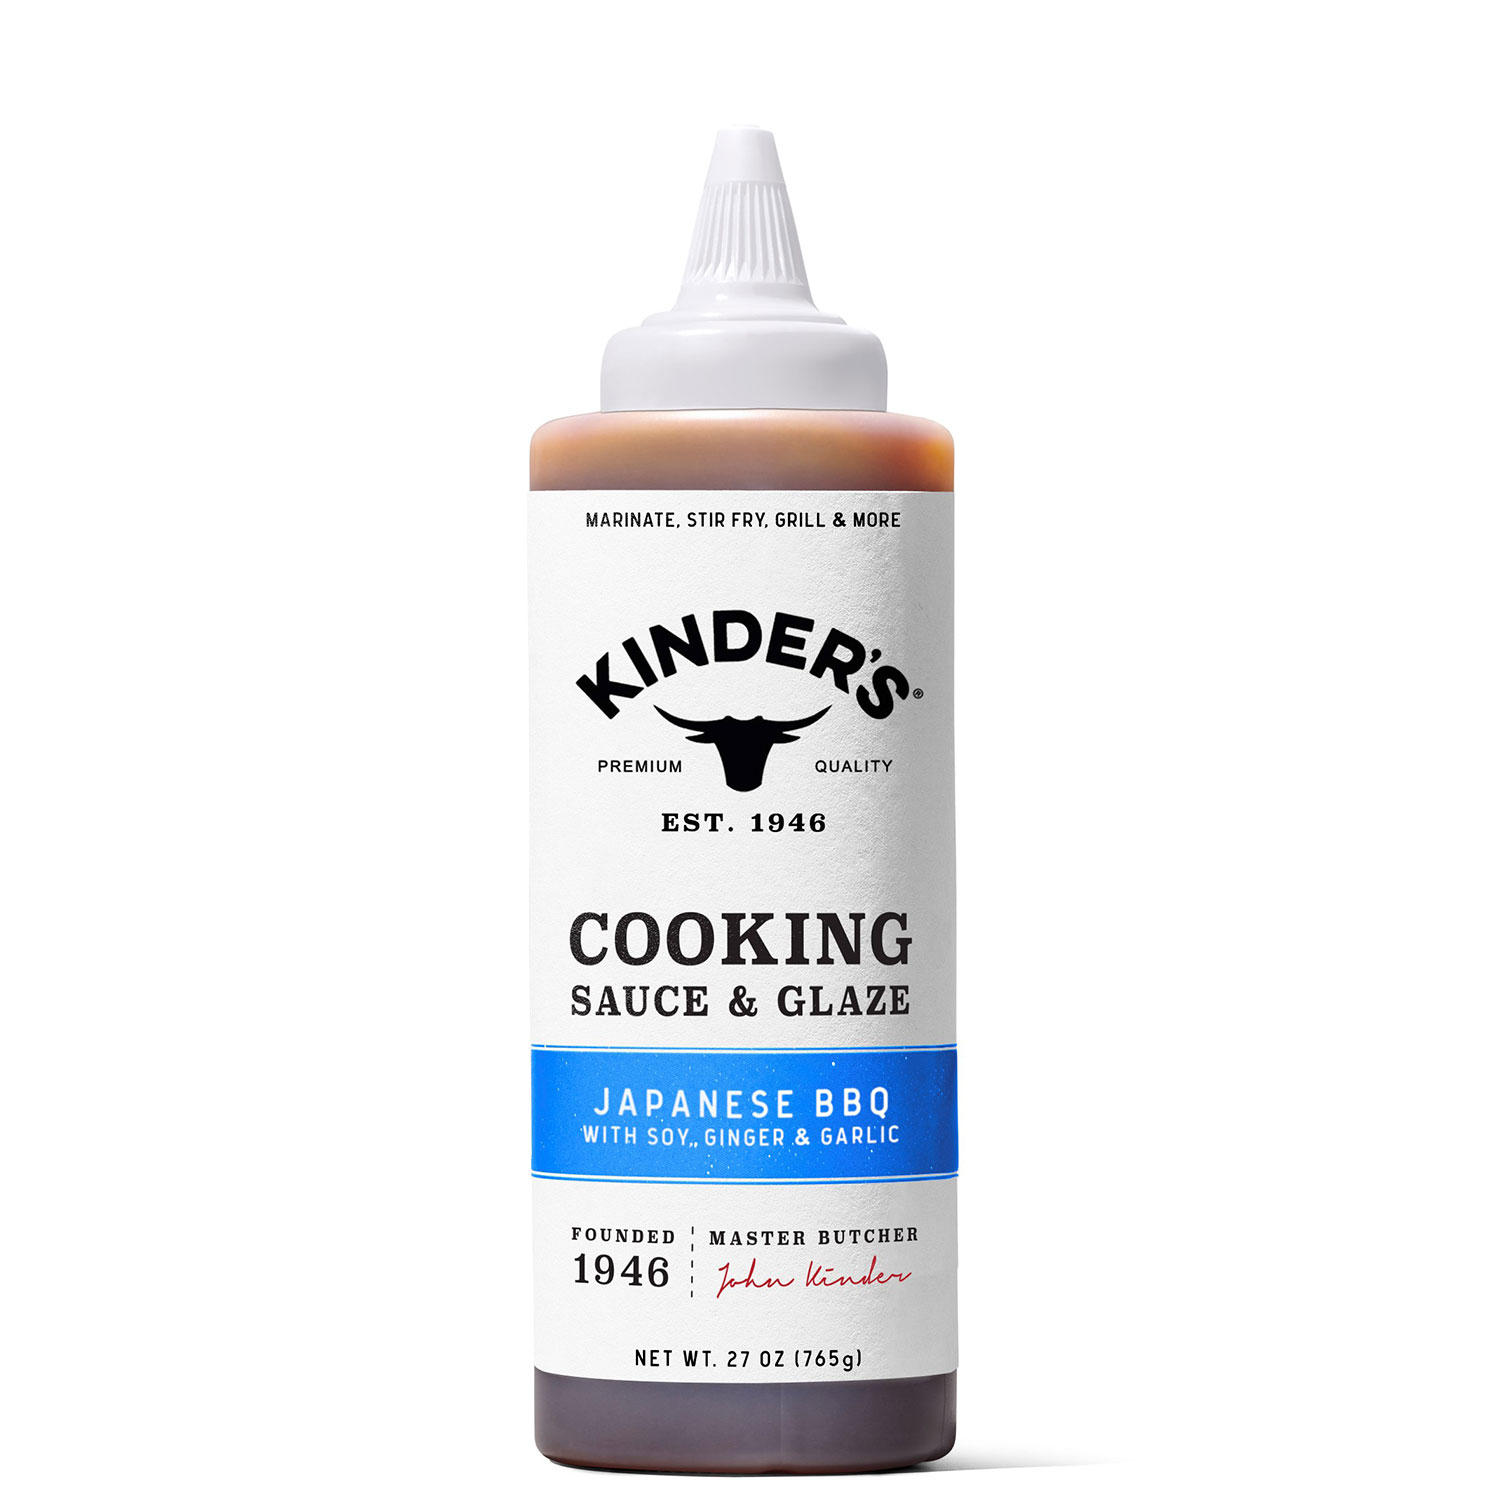 Kinder's Japanese BBQ Cooking Sauce